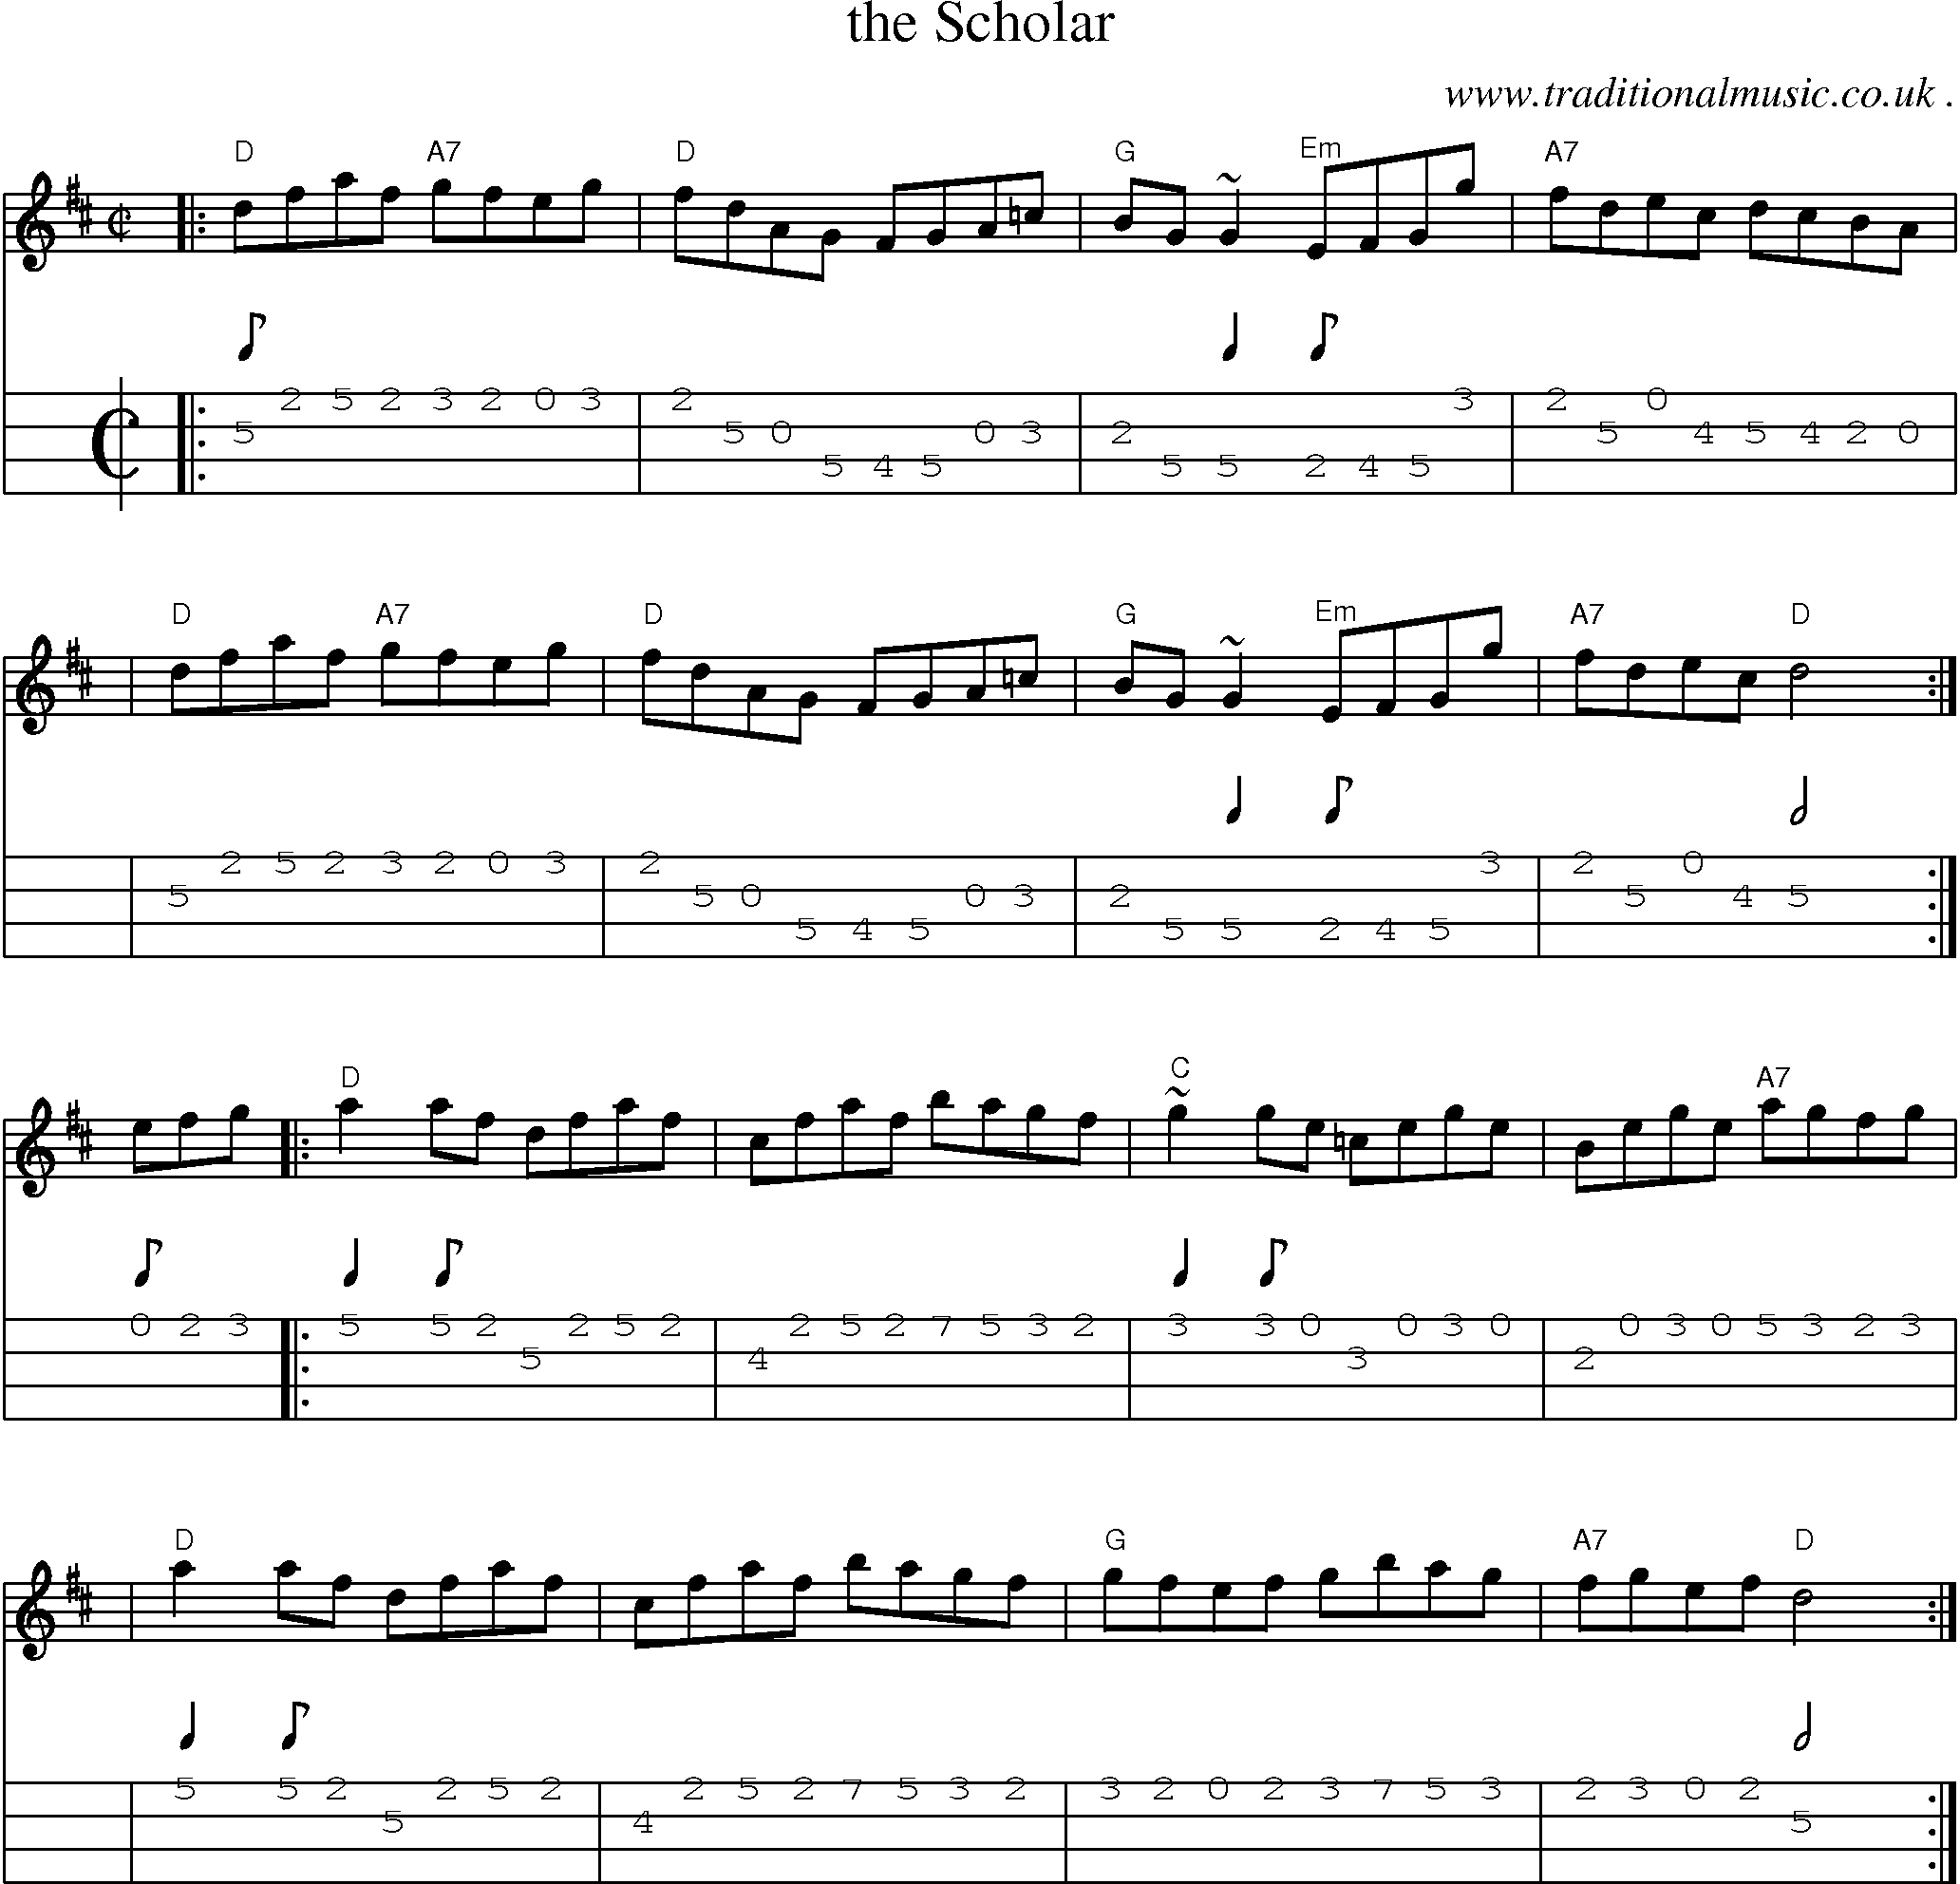 Sheet-music  score, Chords and Mandolin Tabs for The Scholar